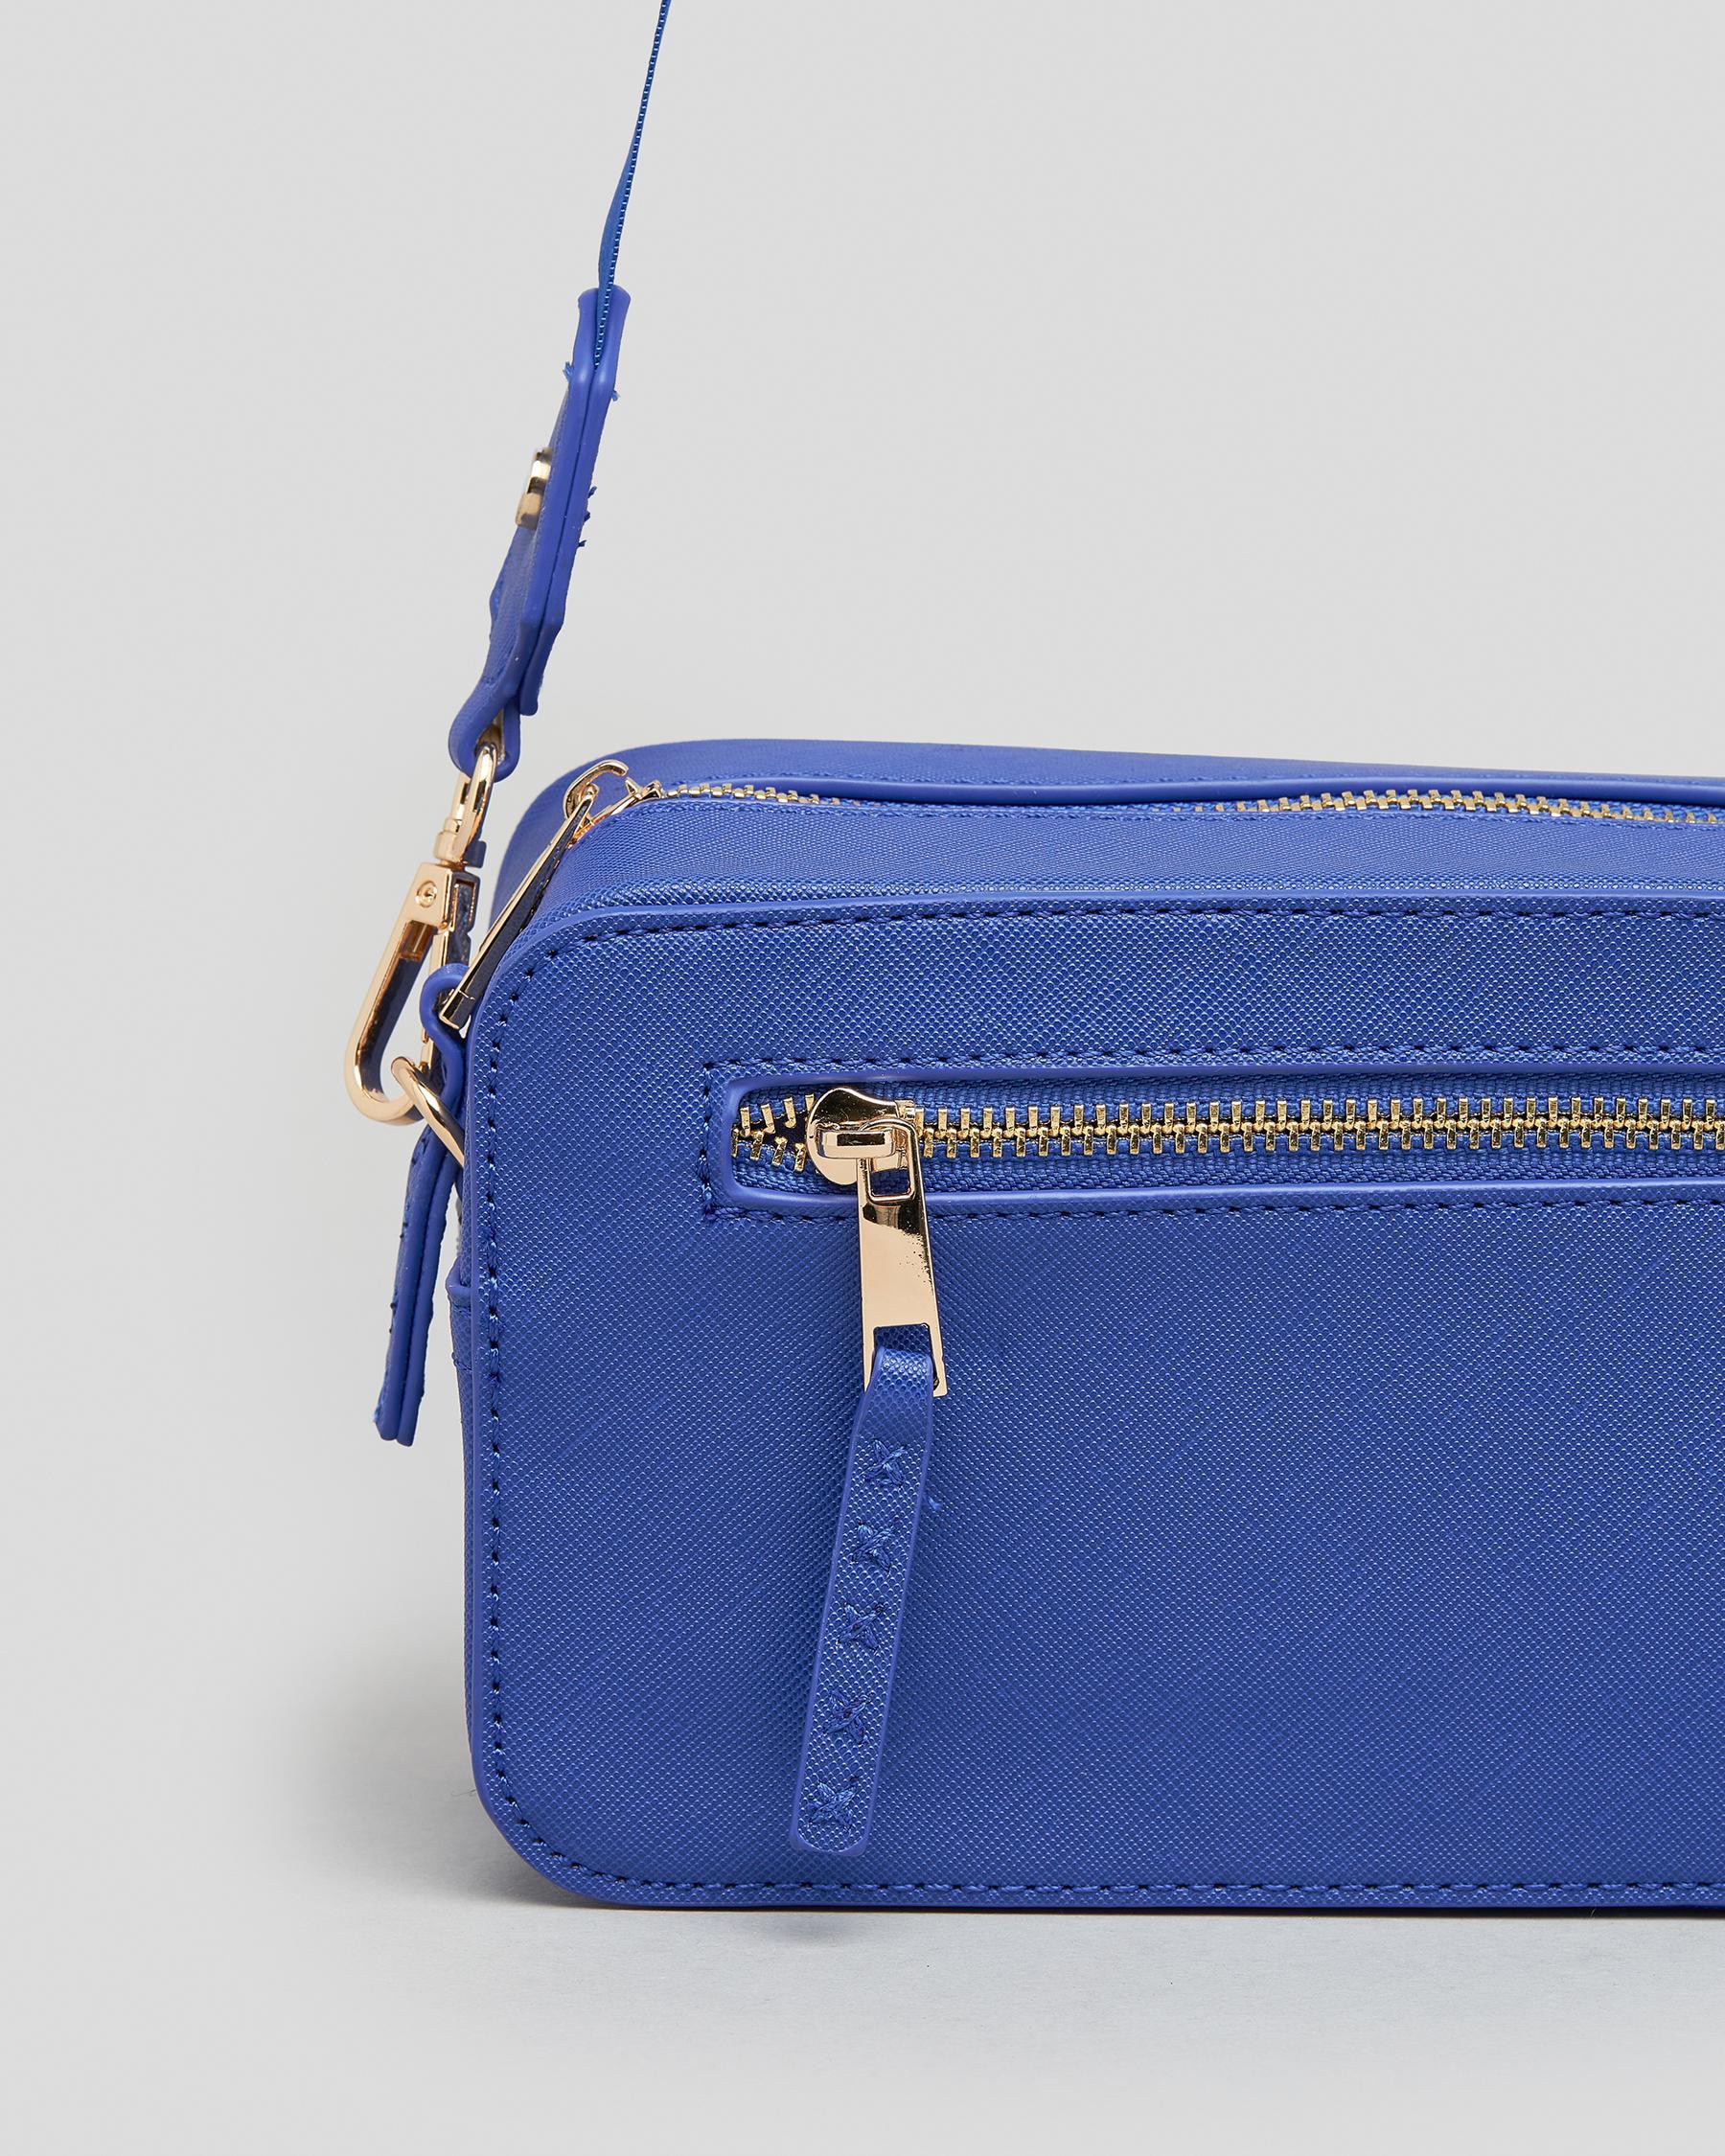 Ava And Ever Coby Crossbody Bag In Sapphire Fast Shipping And Easy Returns City Beach Australia 5132